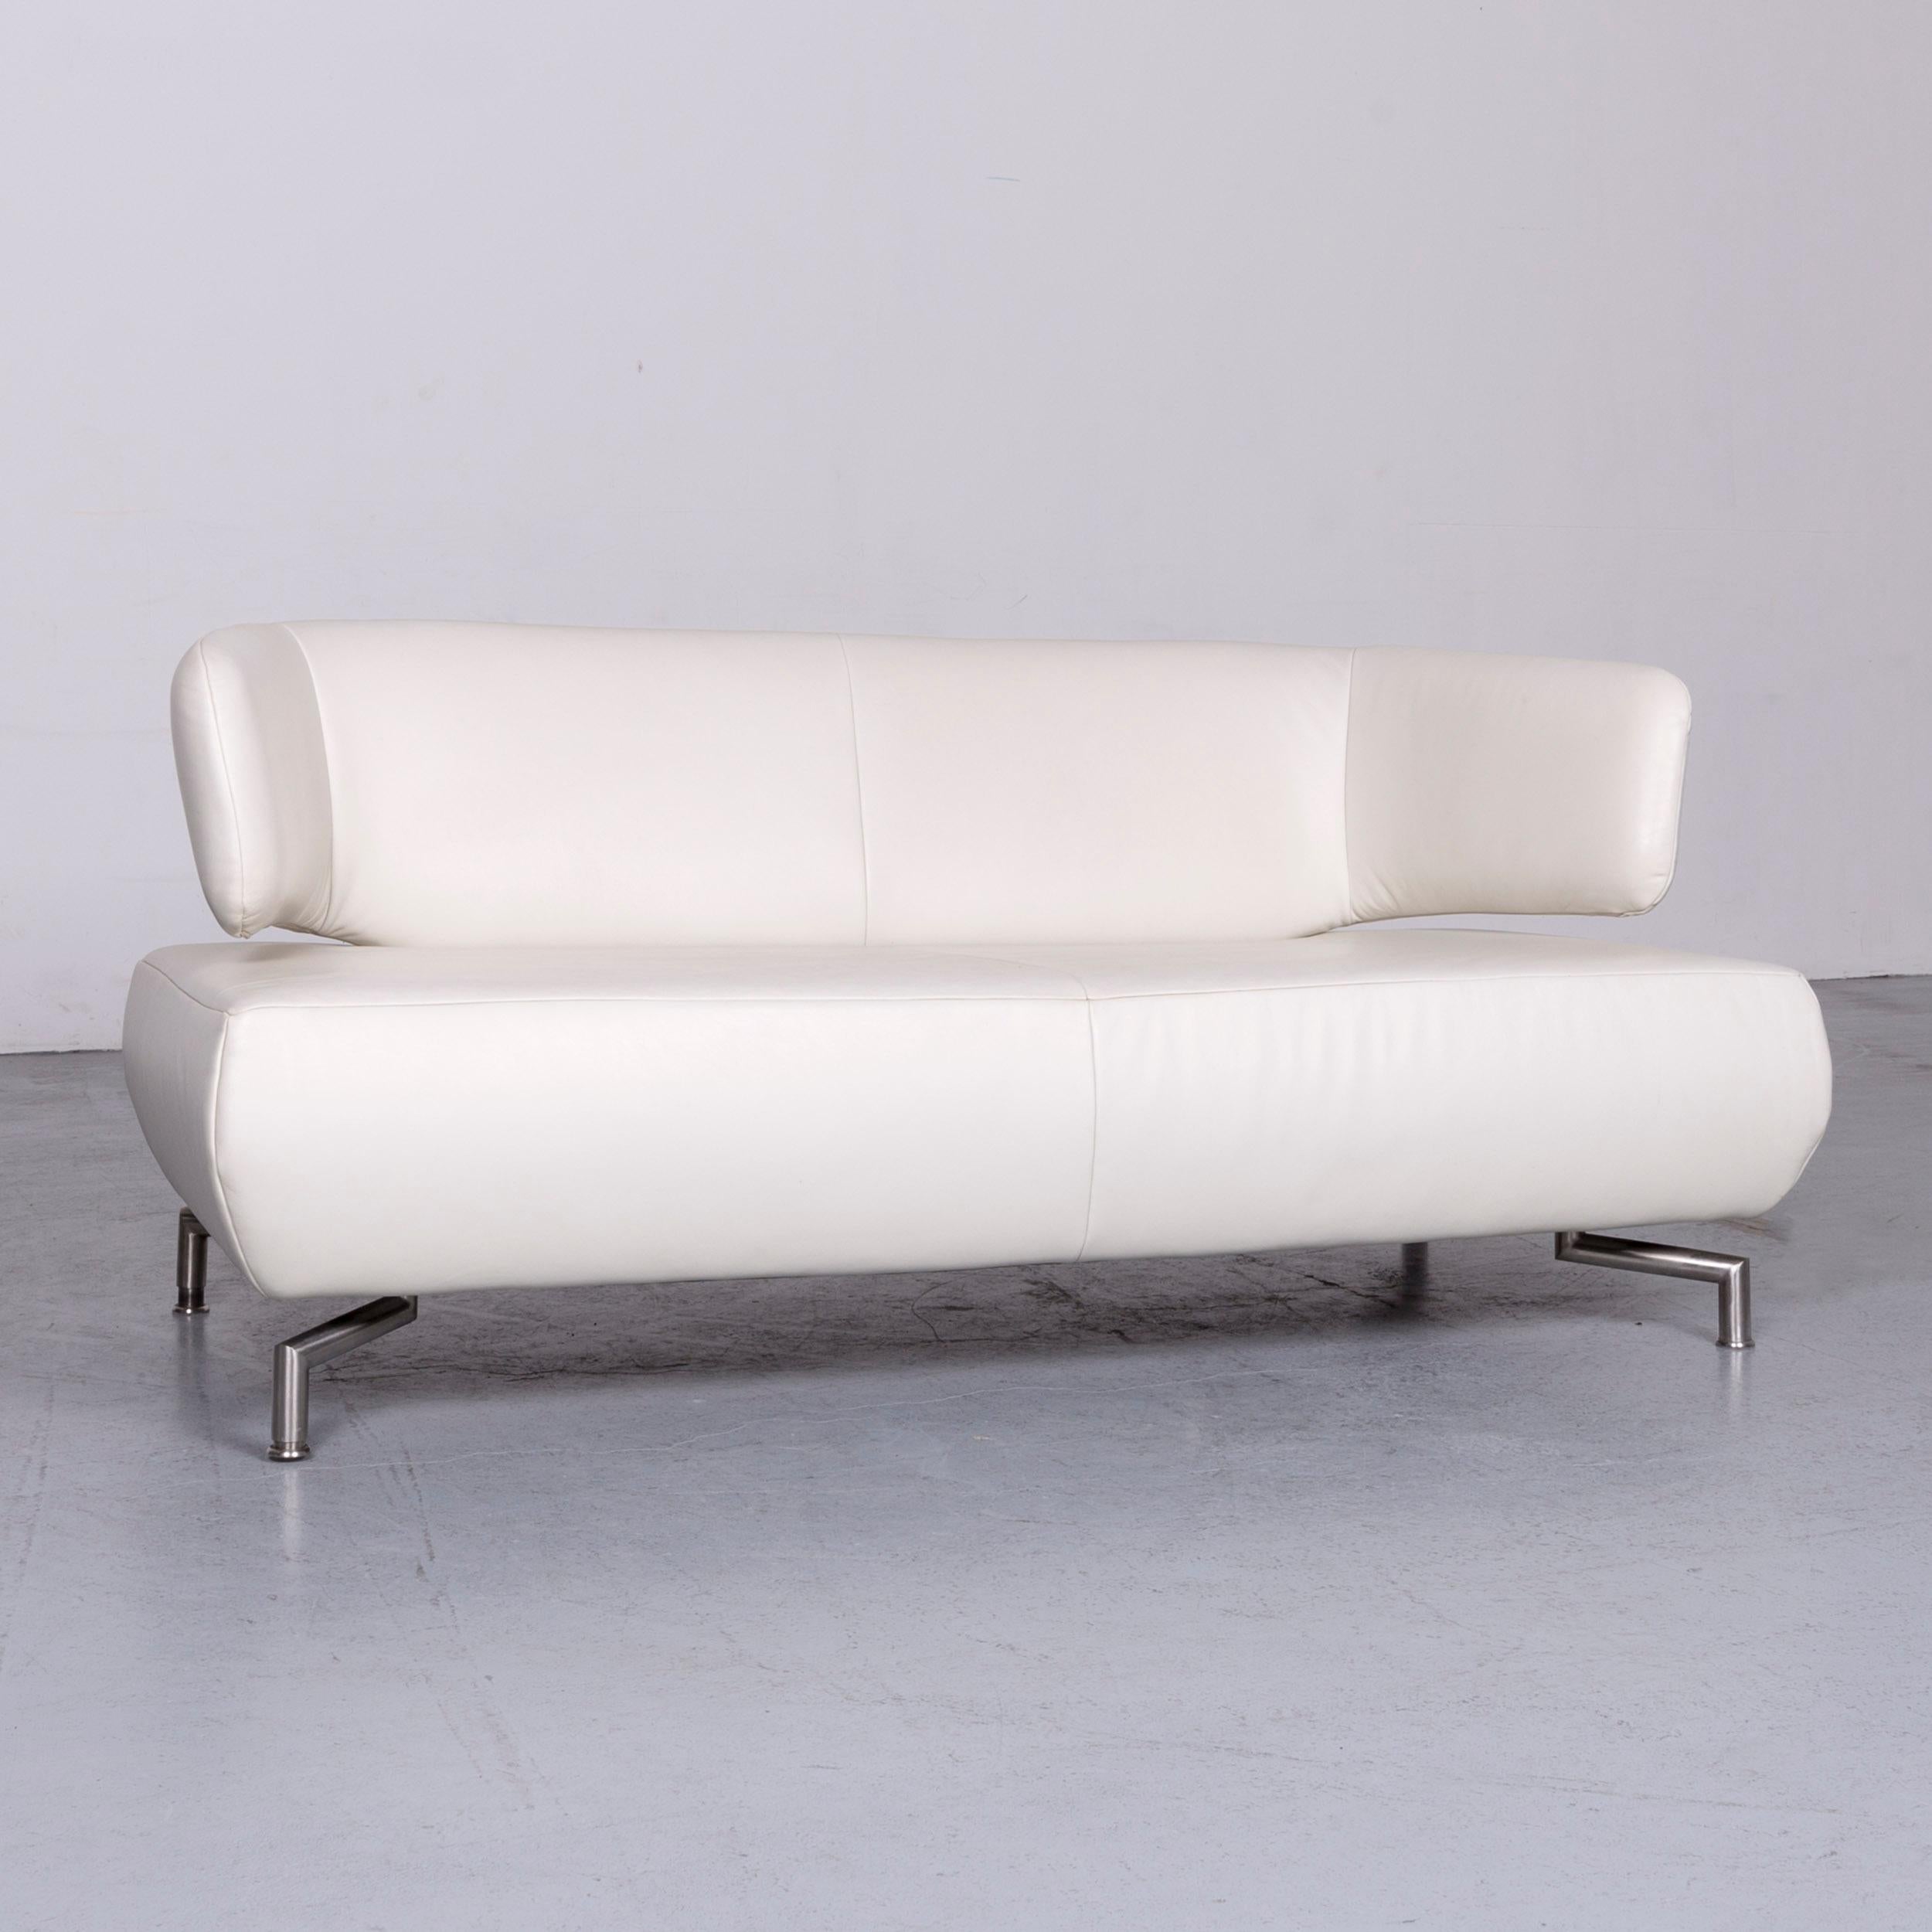 Koinor Designer Two-Seat Sofa White Leather Couch with Pillow 11